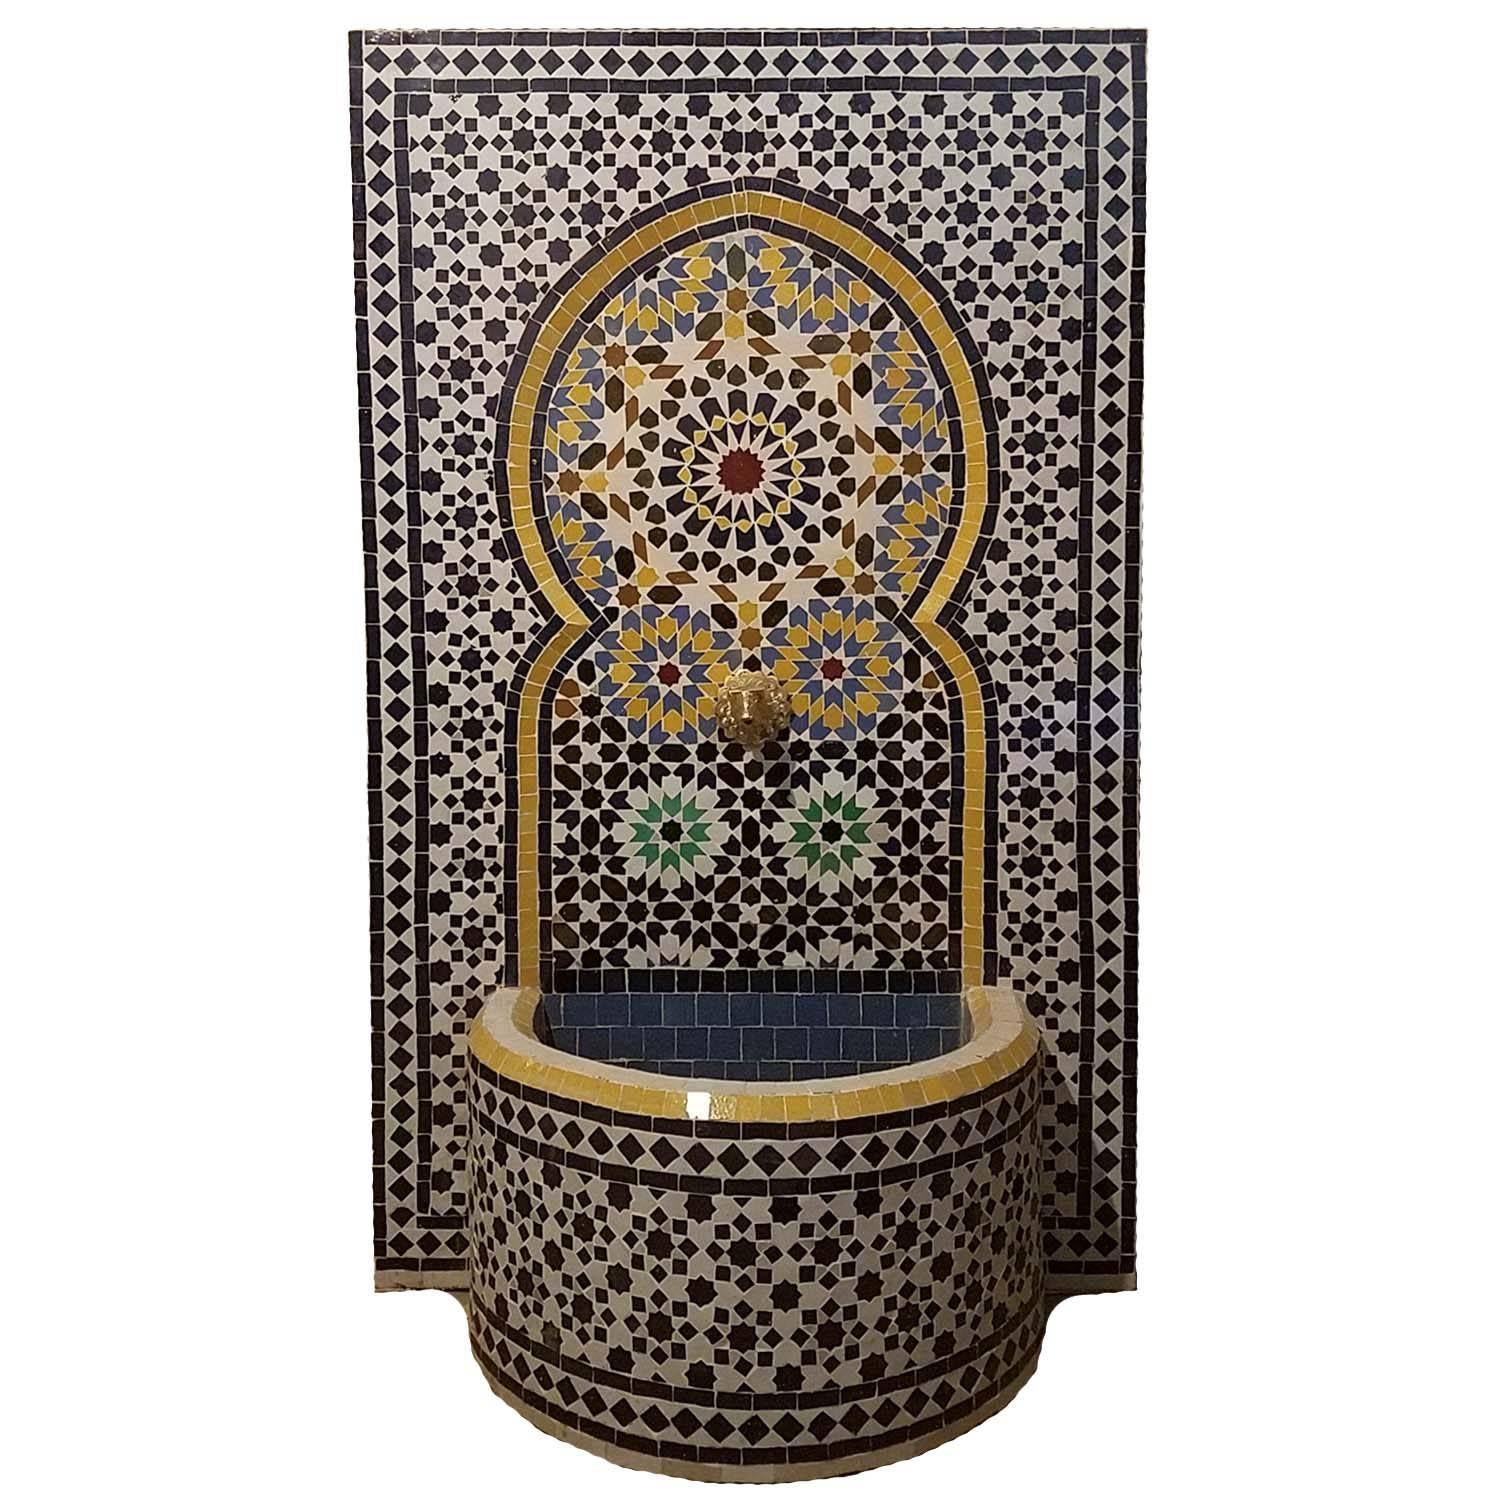 Meknes Moroccan Mosaic Fountain, All Mosaics For Sale 1